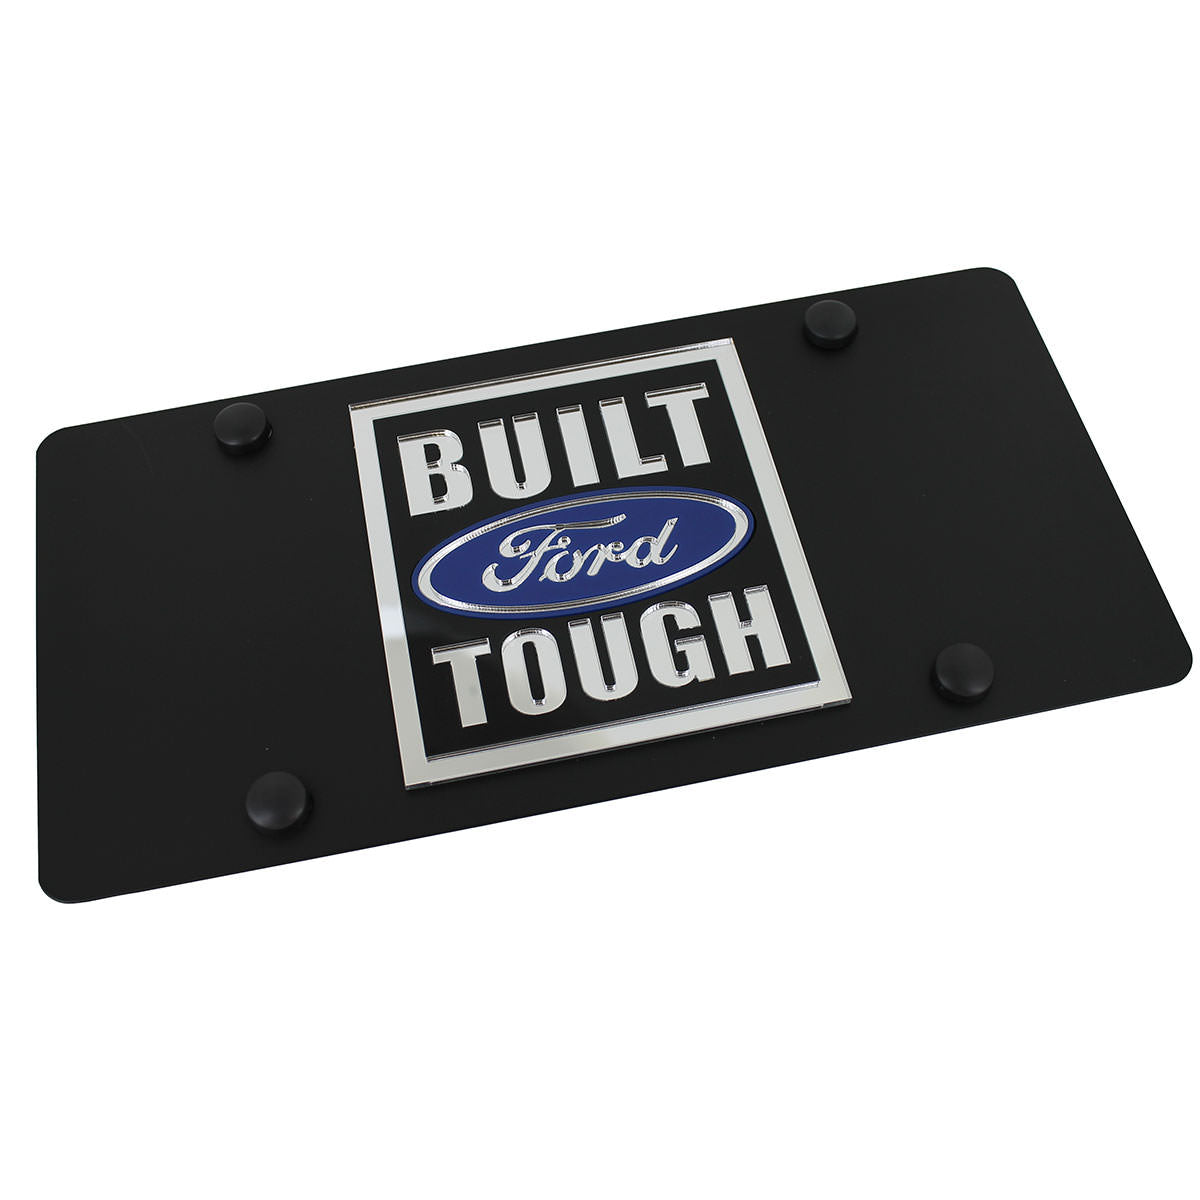 Ford Built Tough License Plate